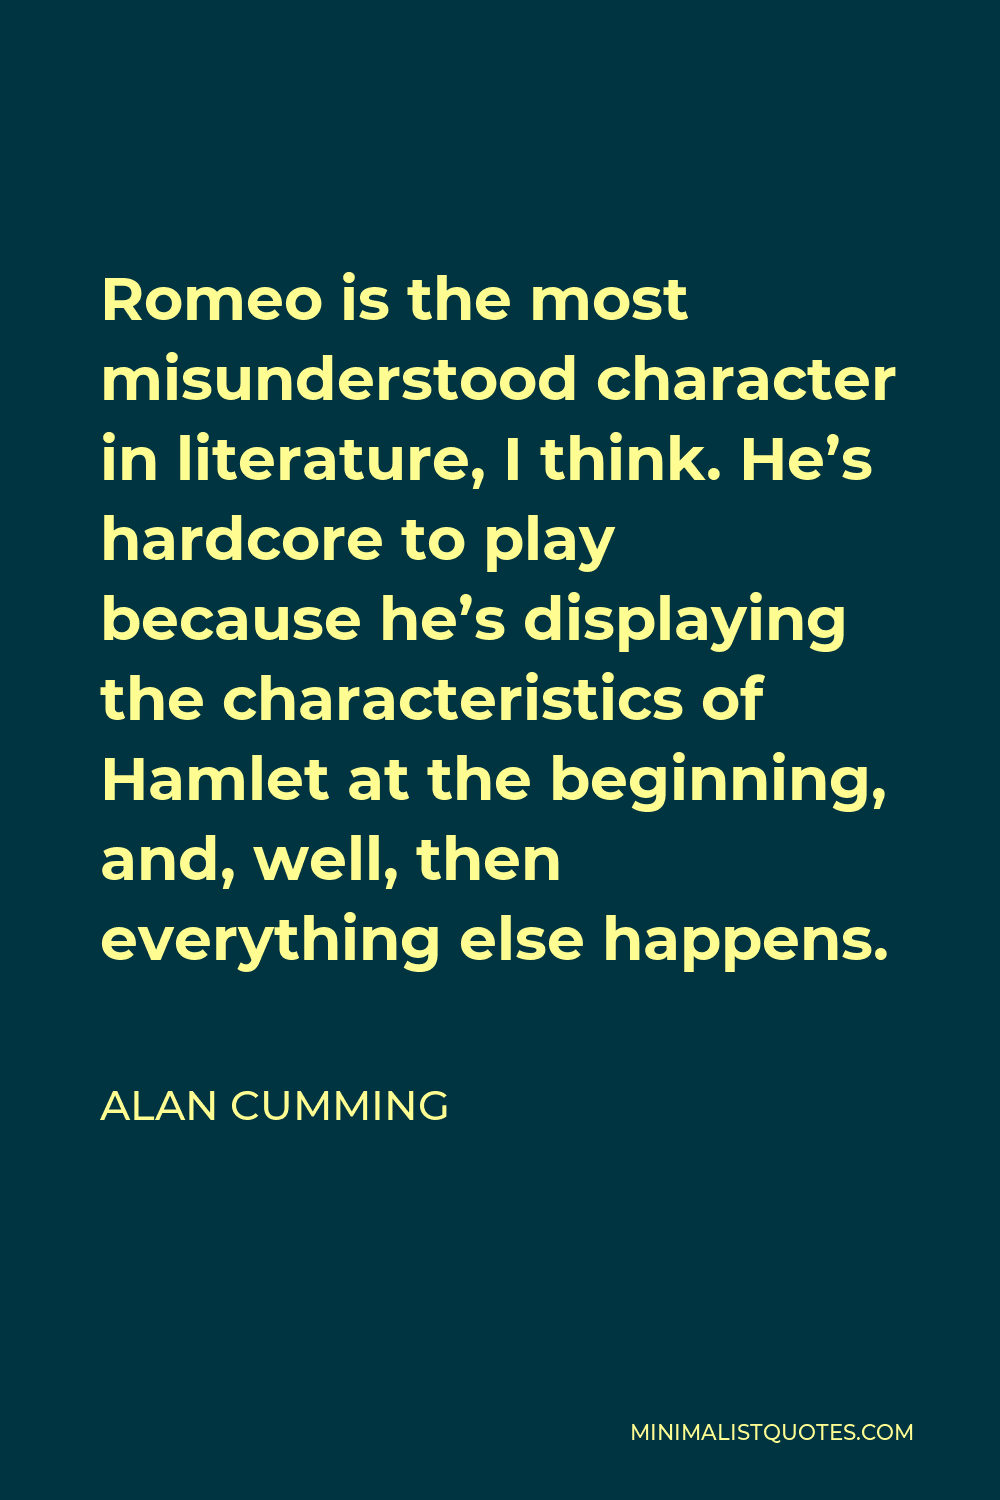 Alan Cumming Quote - Romeo is the most misunderstood character in literature, I think. He’s hardcore to play because he’s displaying the characteristics of Hamlet at the beginning, and, well, then everything else happens.